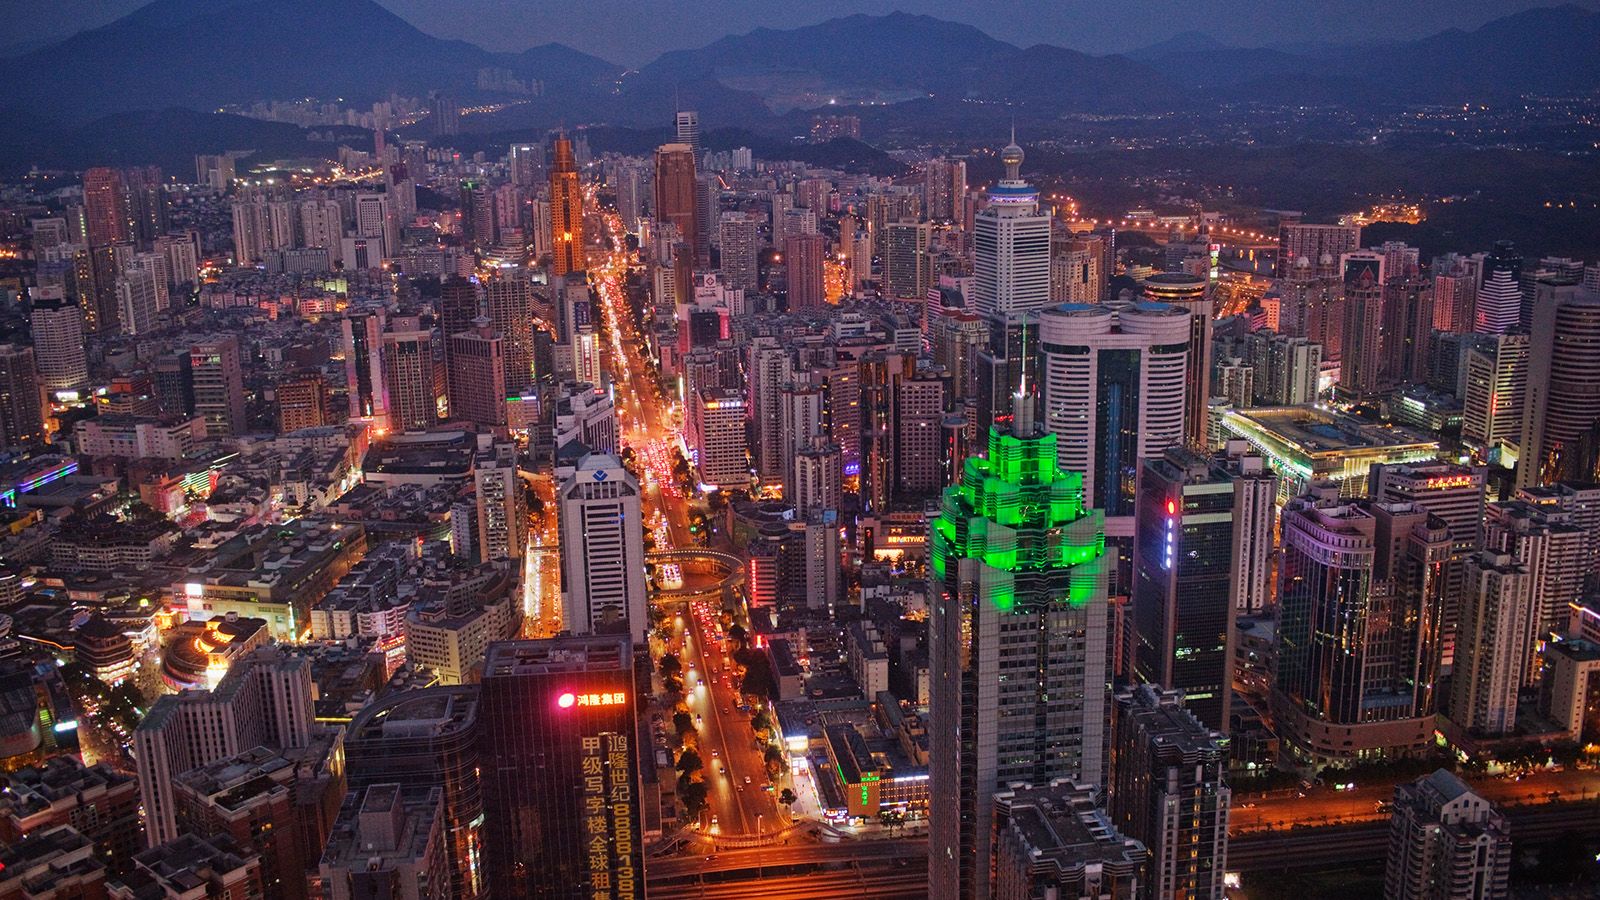 China's top megacities: 14 most impressive urban spaces